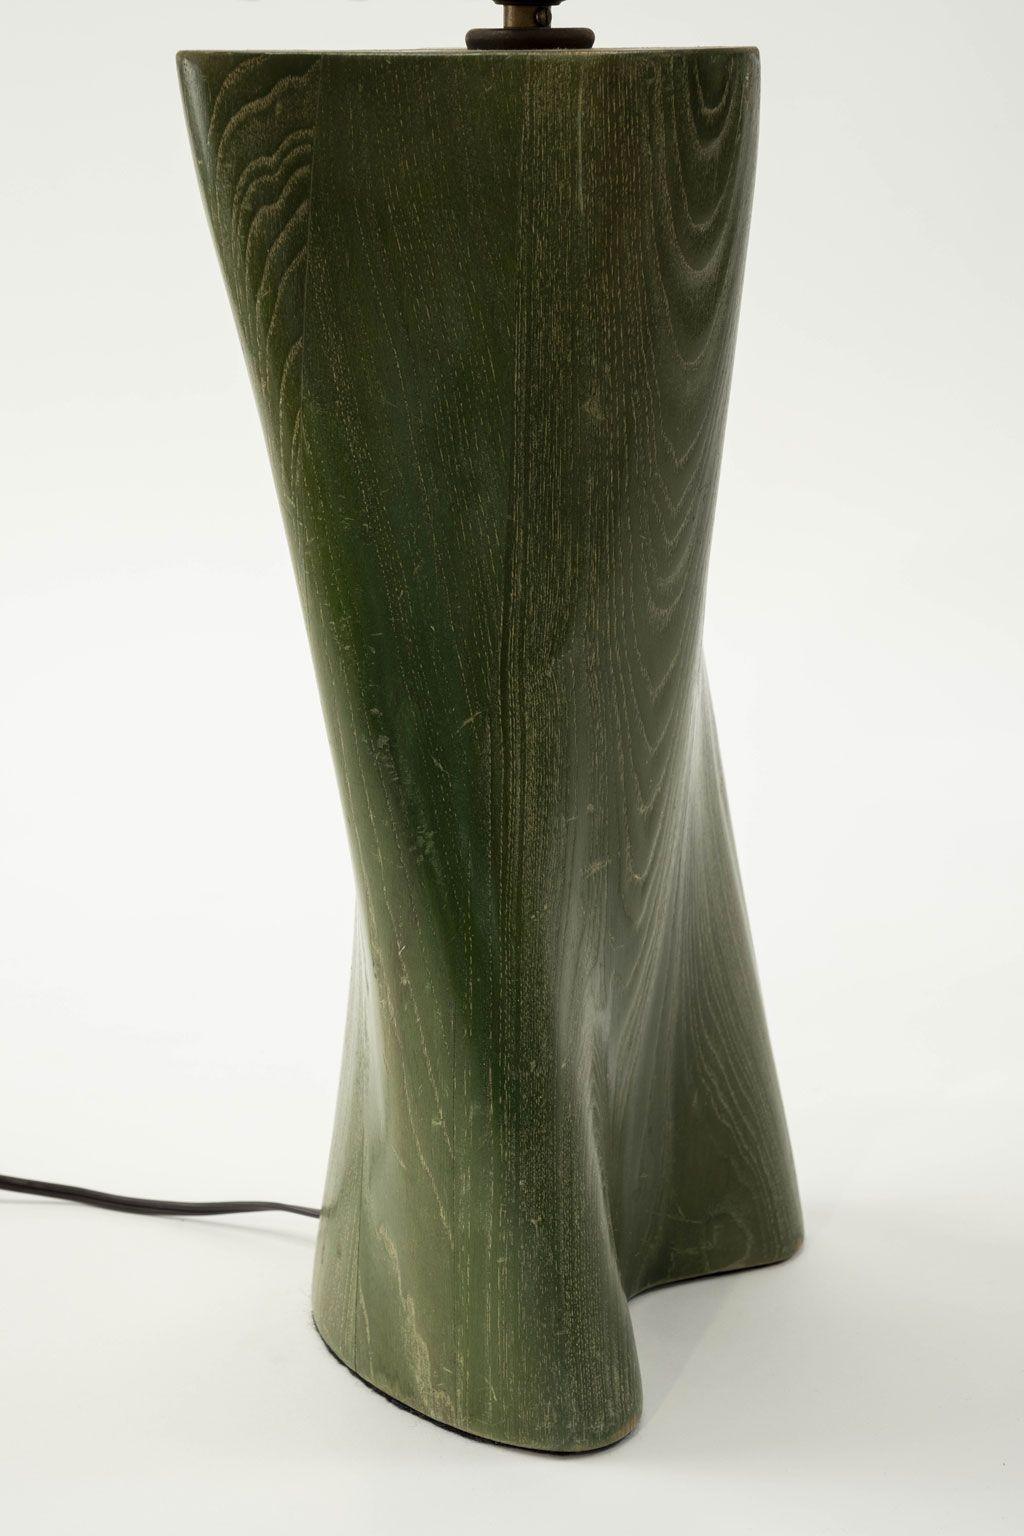 Modern Green-Dyed Carved Wood Table Lamp For Sale 2